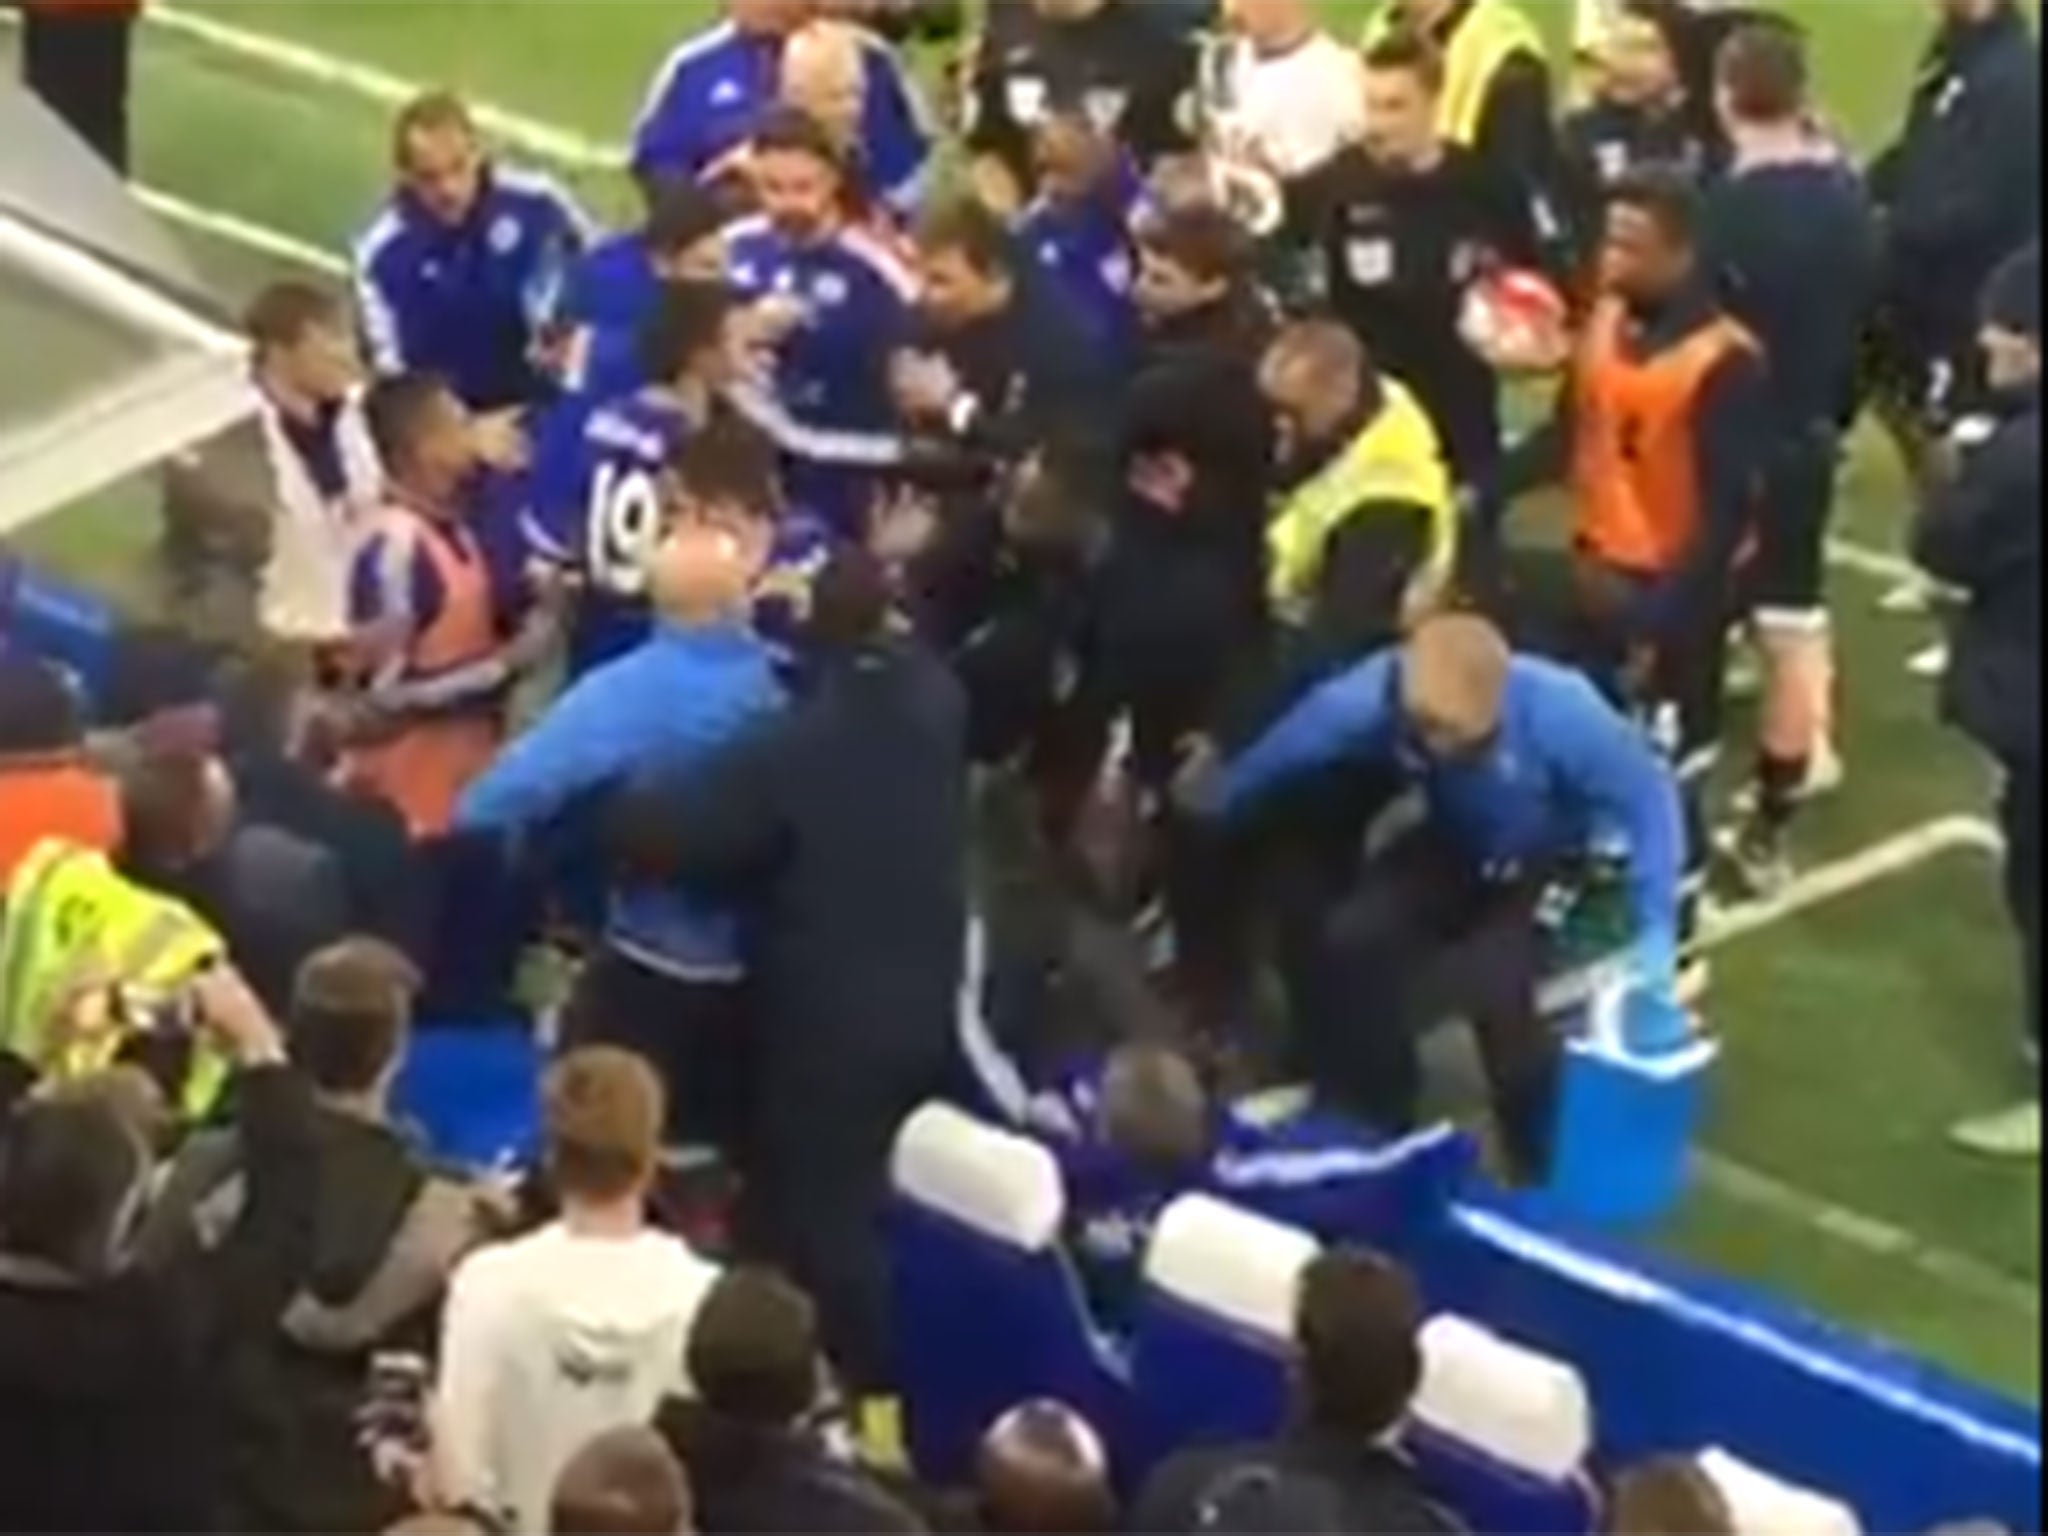 Guus Hiddink falls to the ground